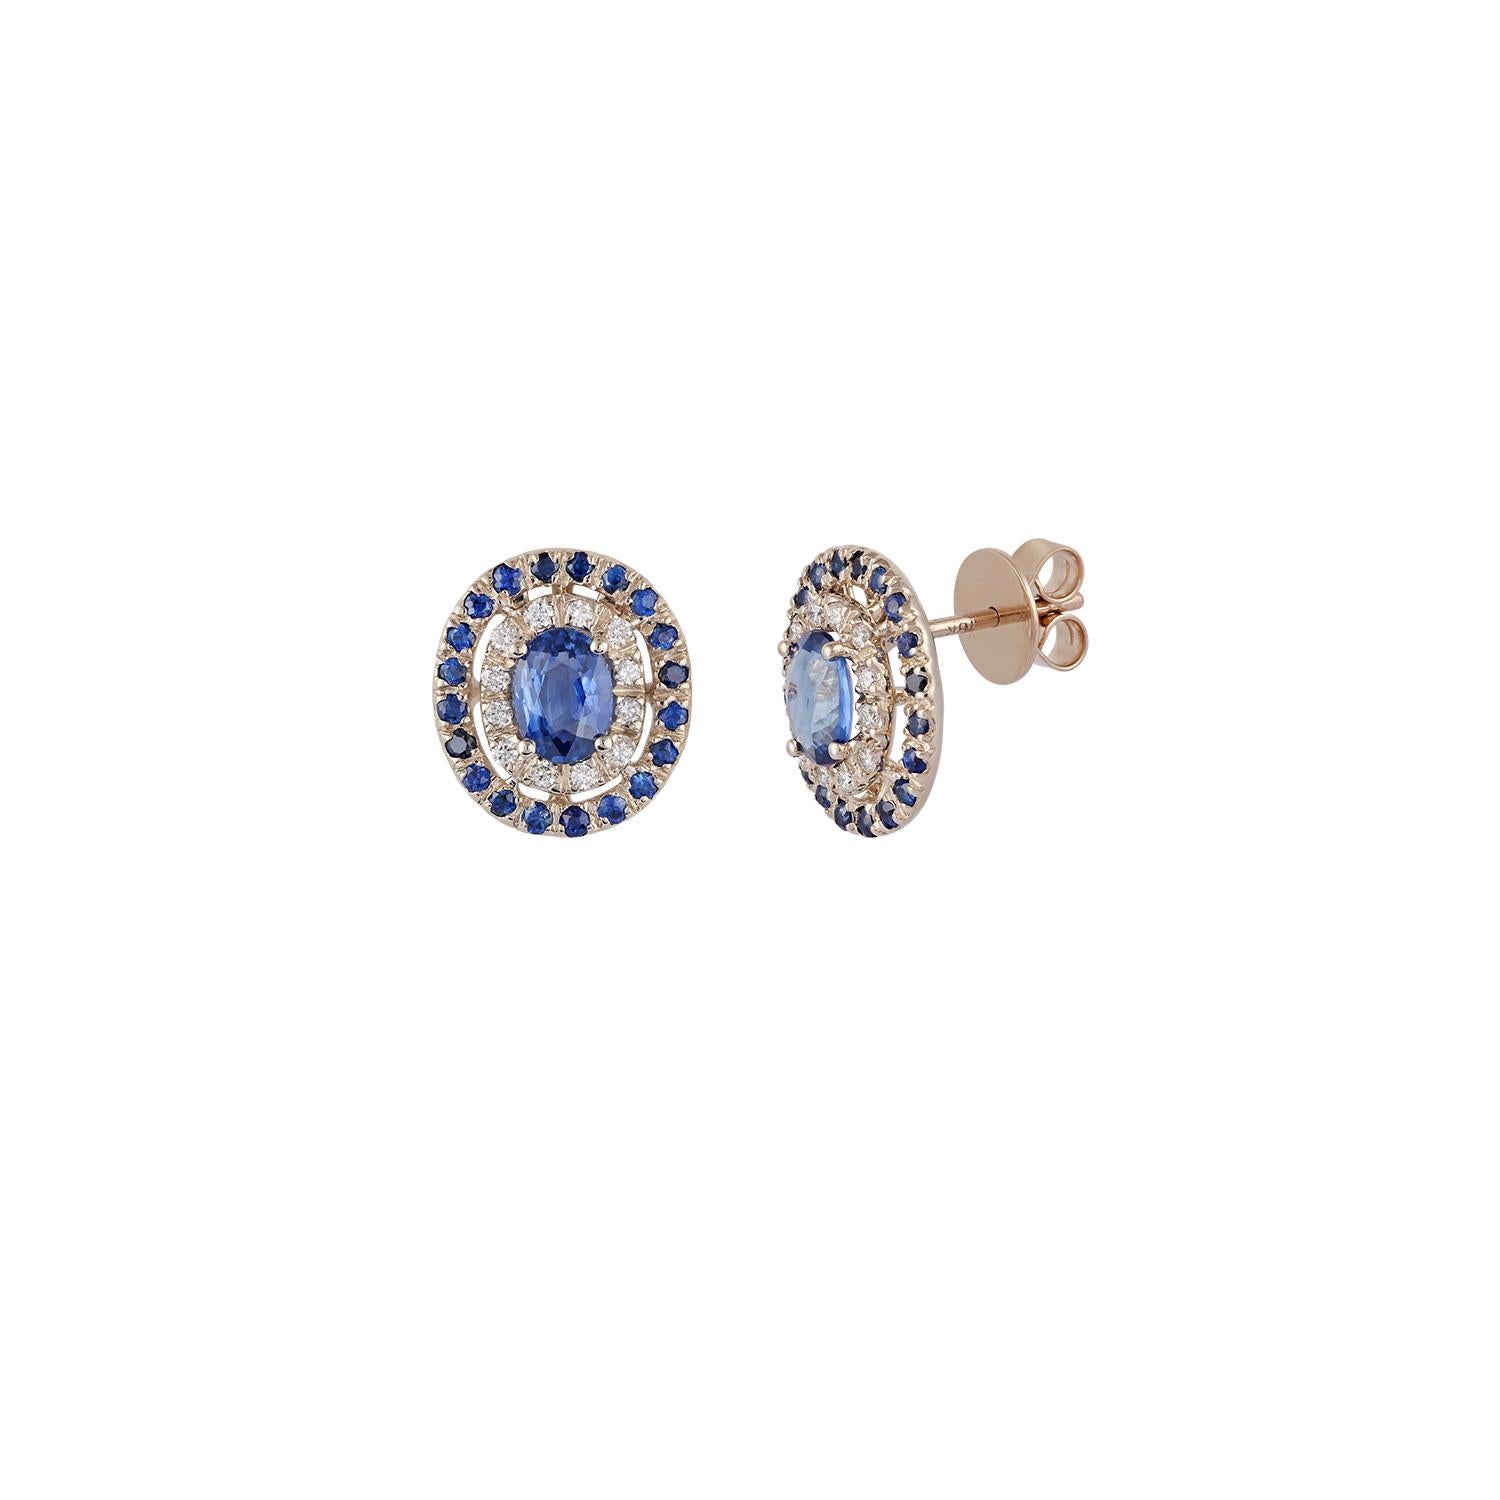 Contemporary Blue Sapphire and Diamond Earrings Studded in 18 Karat White Gold